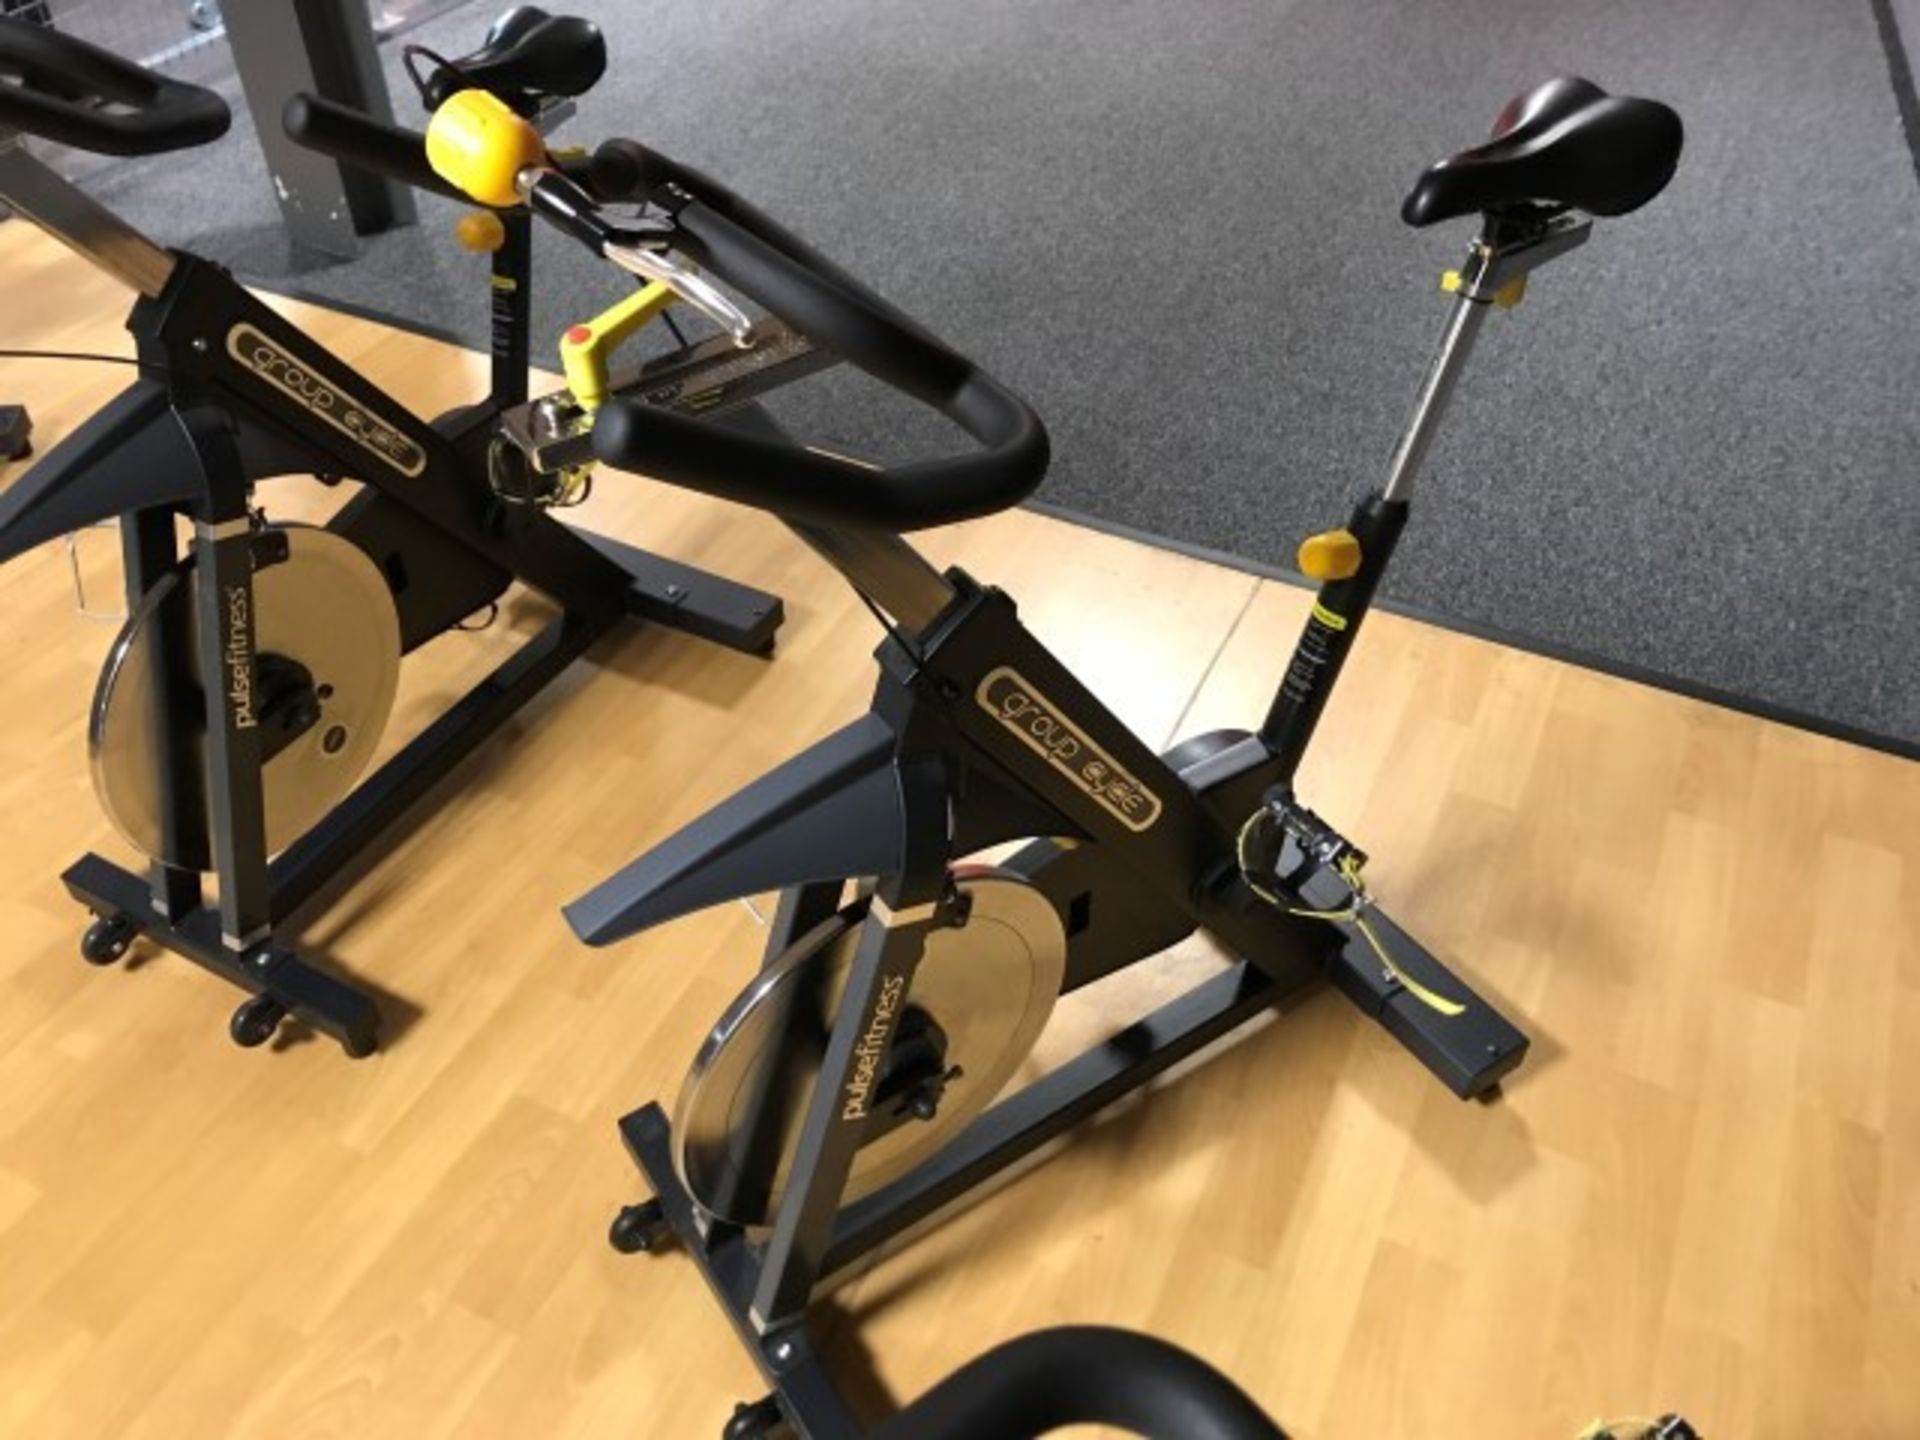 Pulse Fitness 225G Group Cycle spinning bicycle (2017) - Image 2 of 3